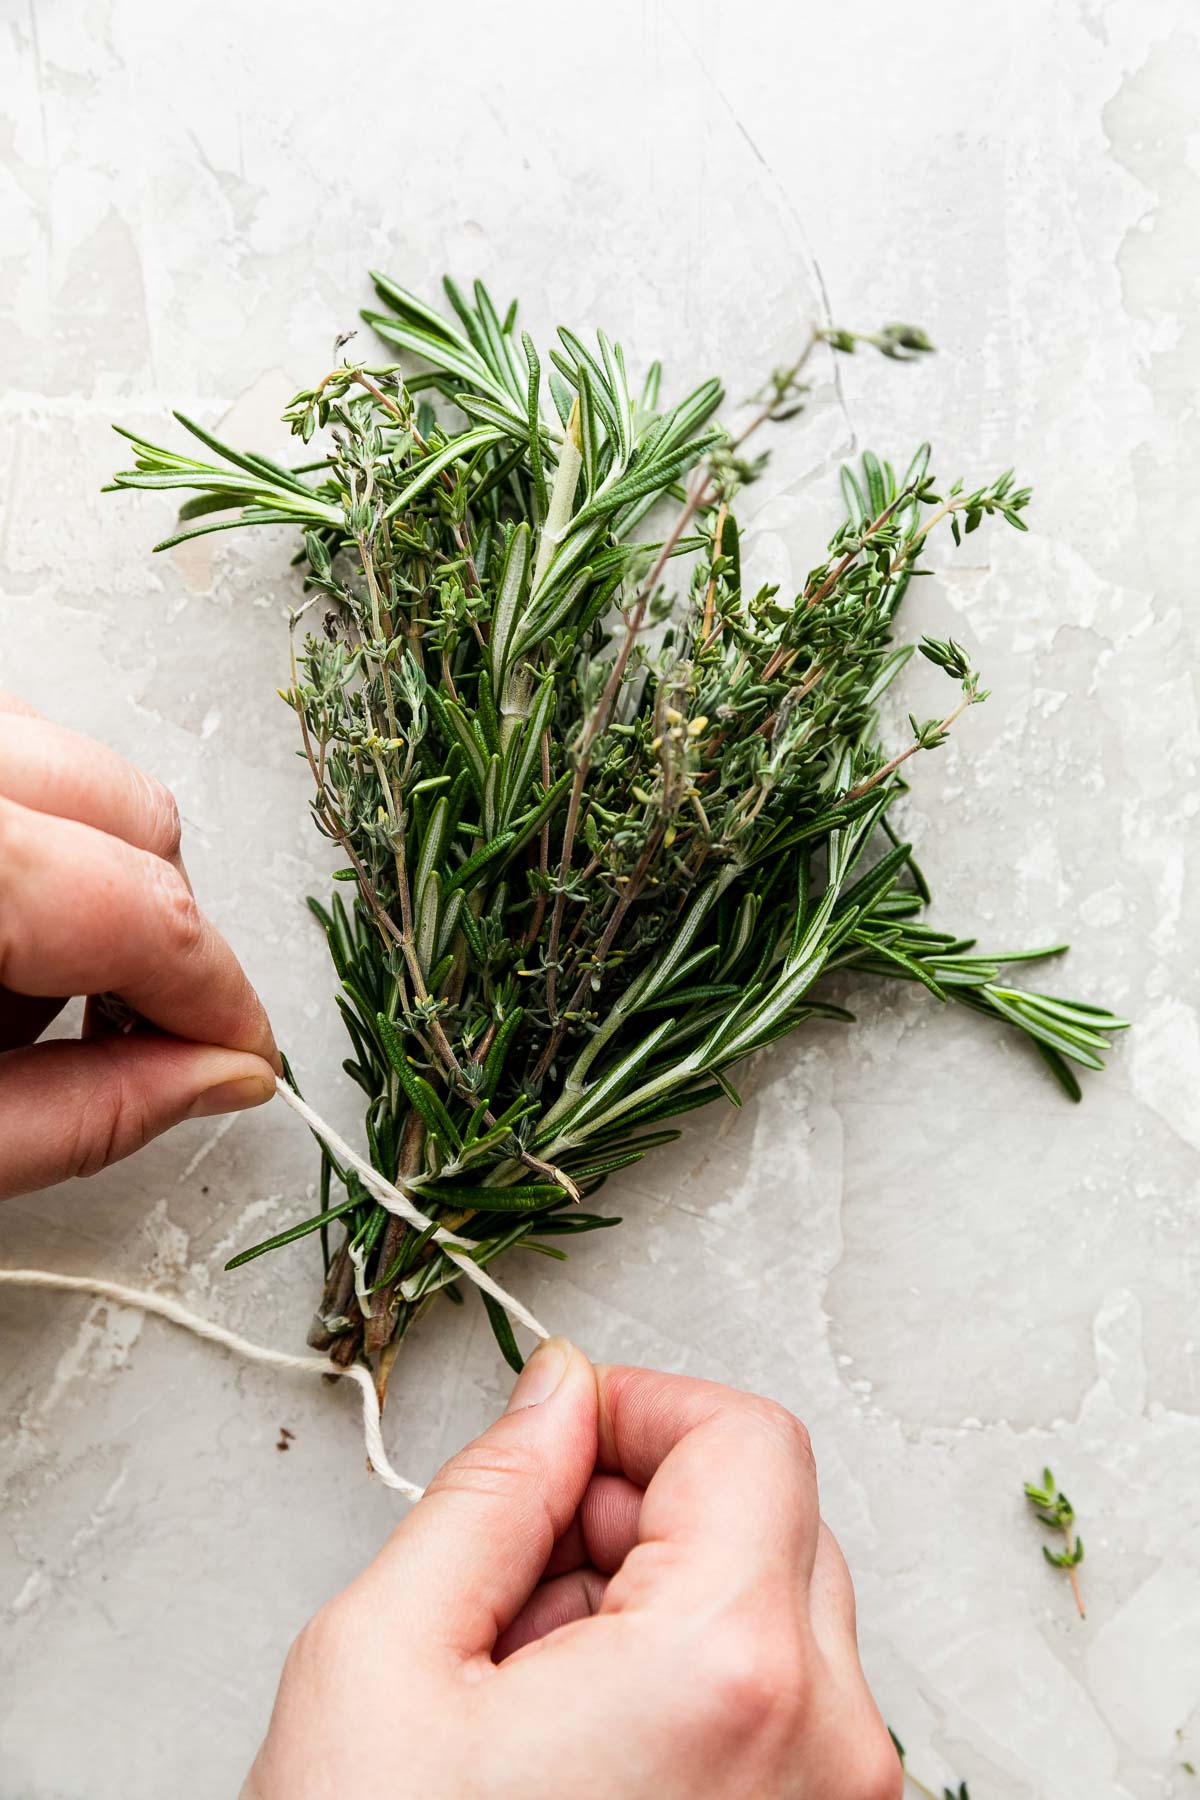 A bundle of gathered loose fresh rosemary and fresh thyme sprigs rest atop a creamy white textured surface. A woman's hands work to tie a piece of kitchen twine around the bottom of the herb bundle, securely.